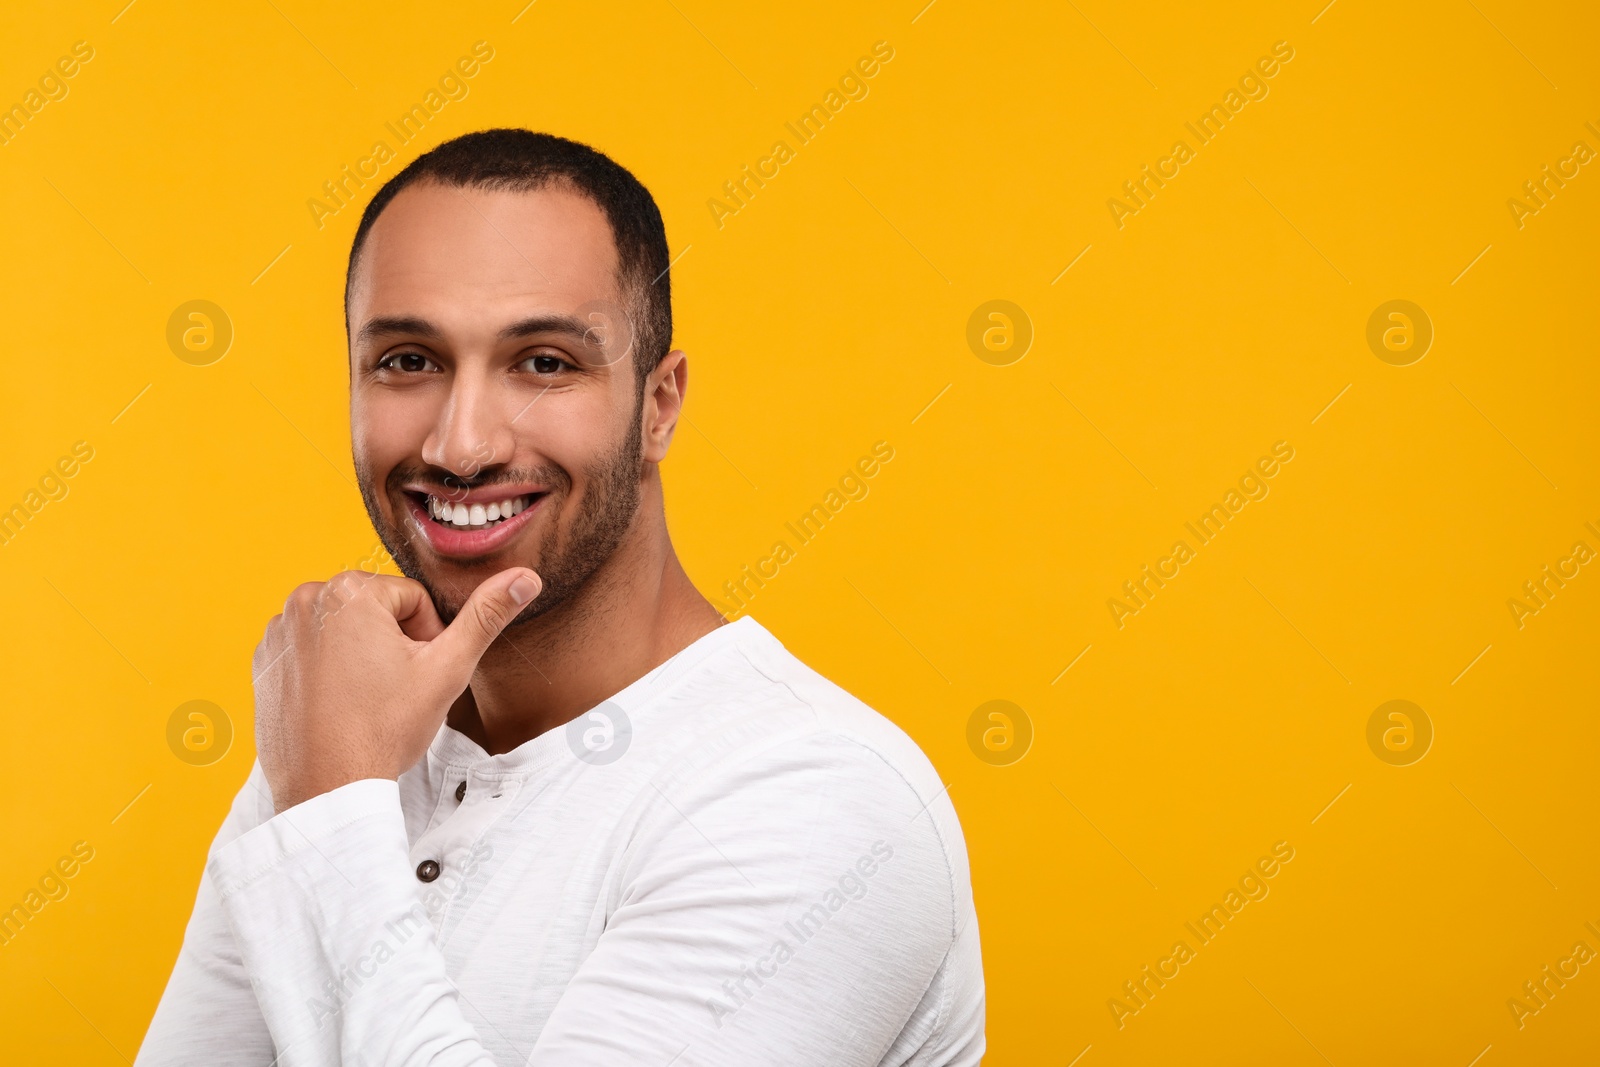 Photo of Portrait of smiling man with healthy clean teeth on orange background. Space for text